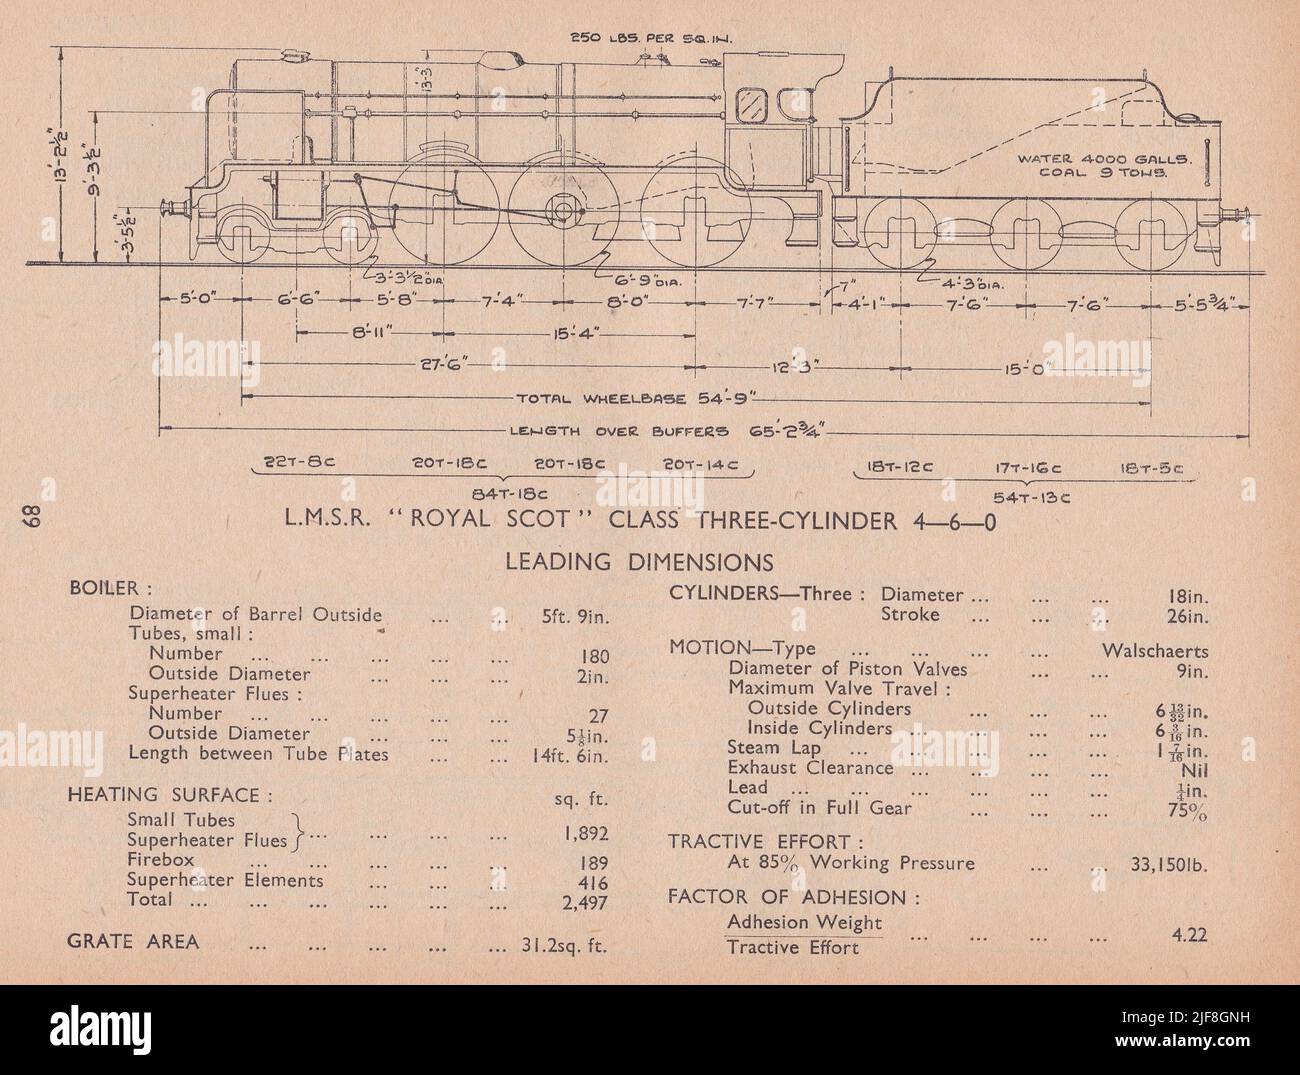 Vintage diagram of a L.M.S.R. Royal Scot Class Three-Cylinder 4-6-0 Leading Dimensions. Stock Photo